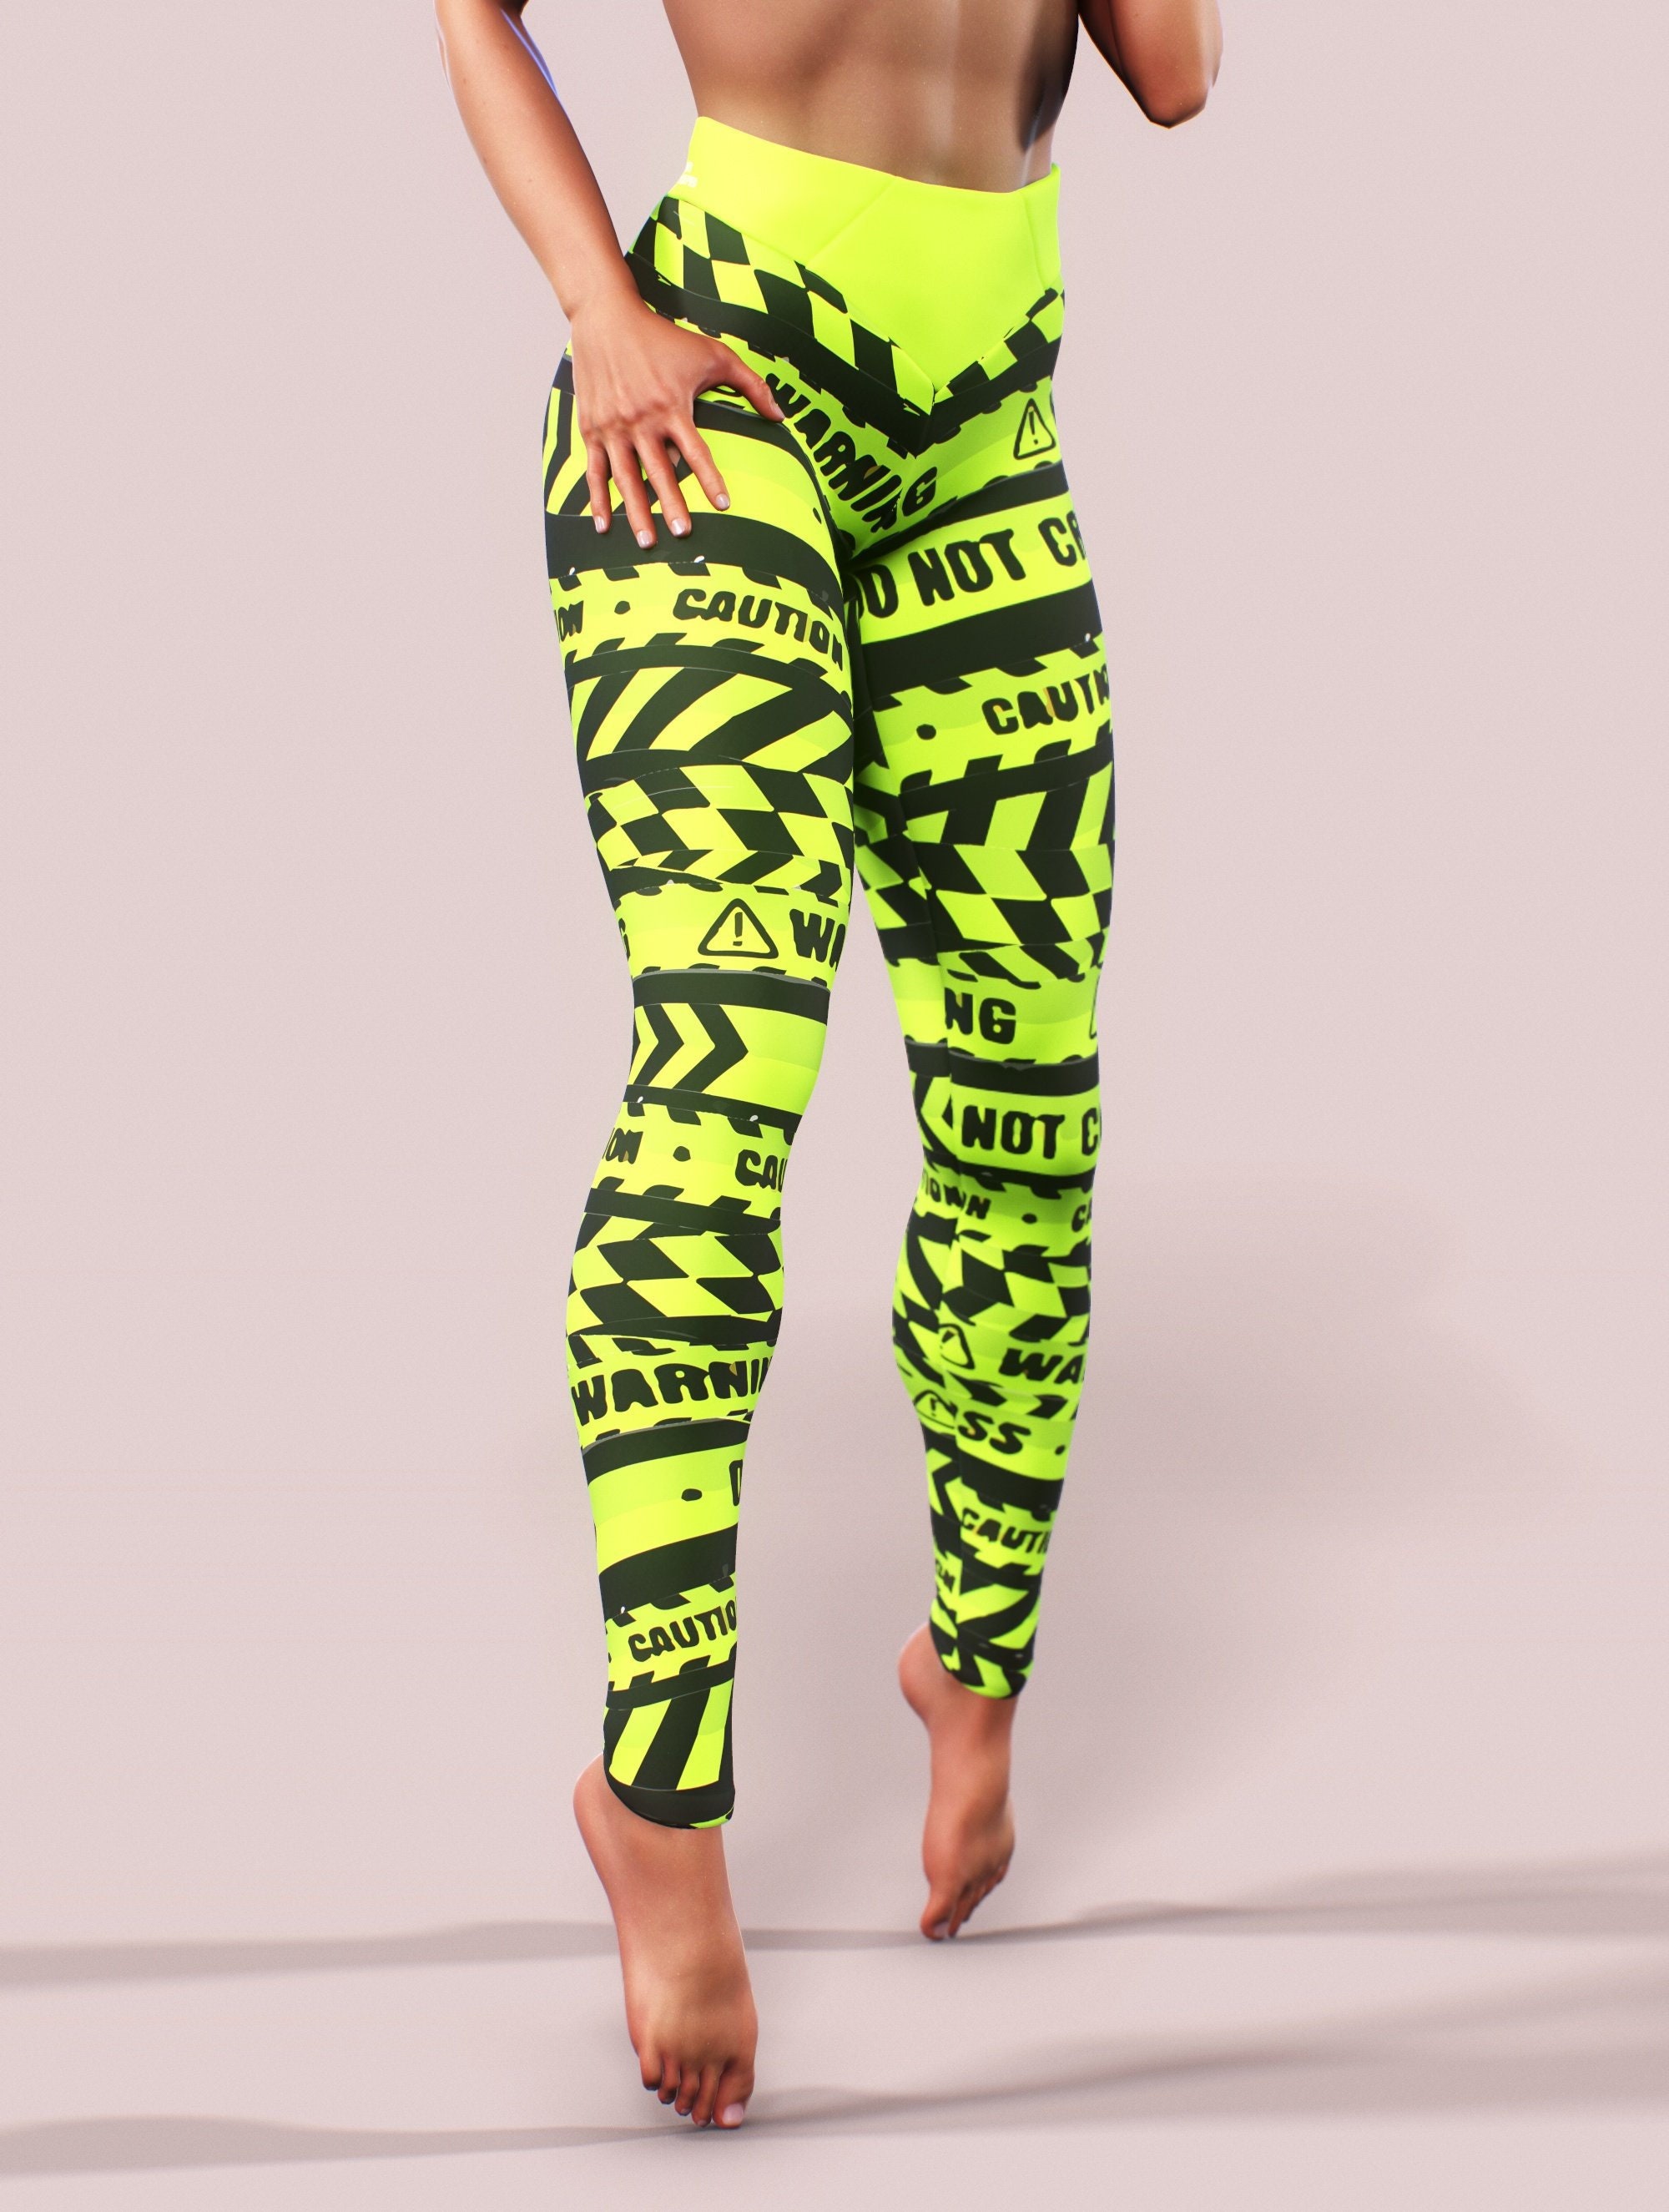 Caution Signs Leggings Warning Workout Clothing Neon Green Printed Tights  Women Yoga Pants Shaping Belt Gym Outfit Fitness Activewear -  New  Zealand